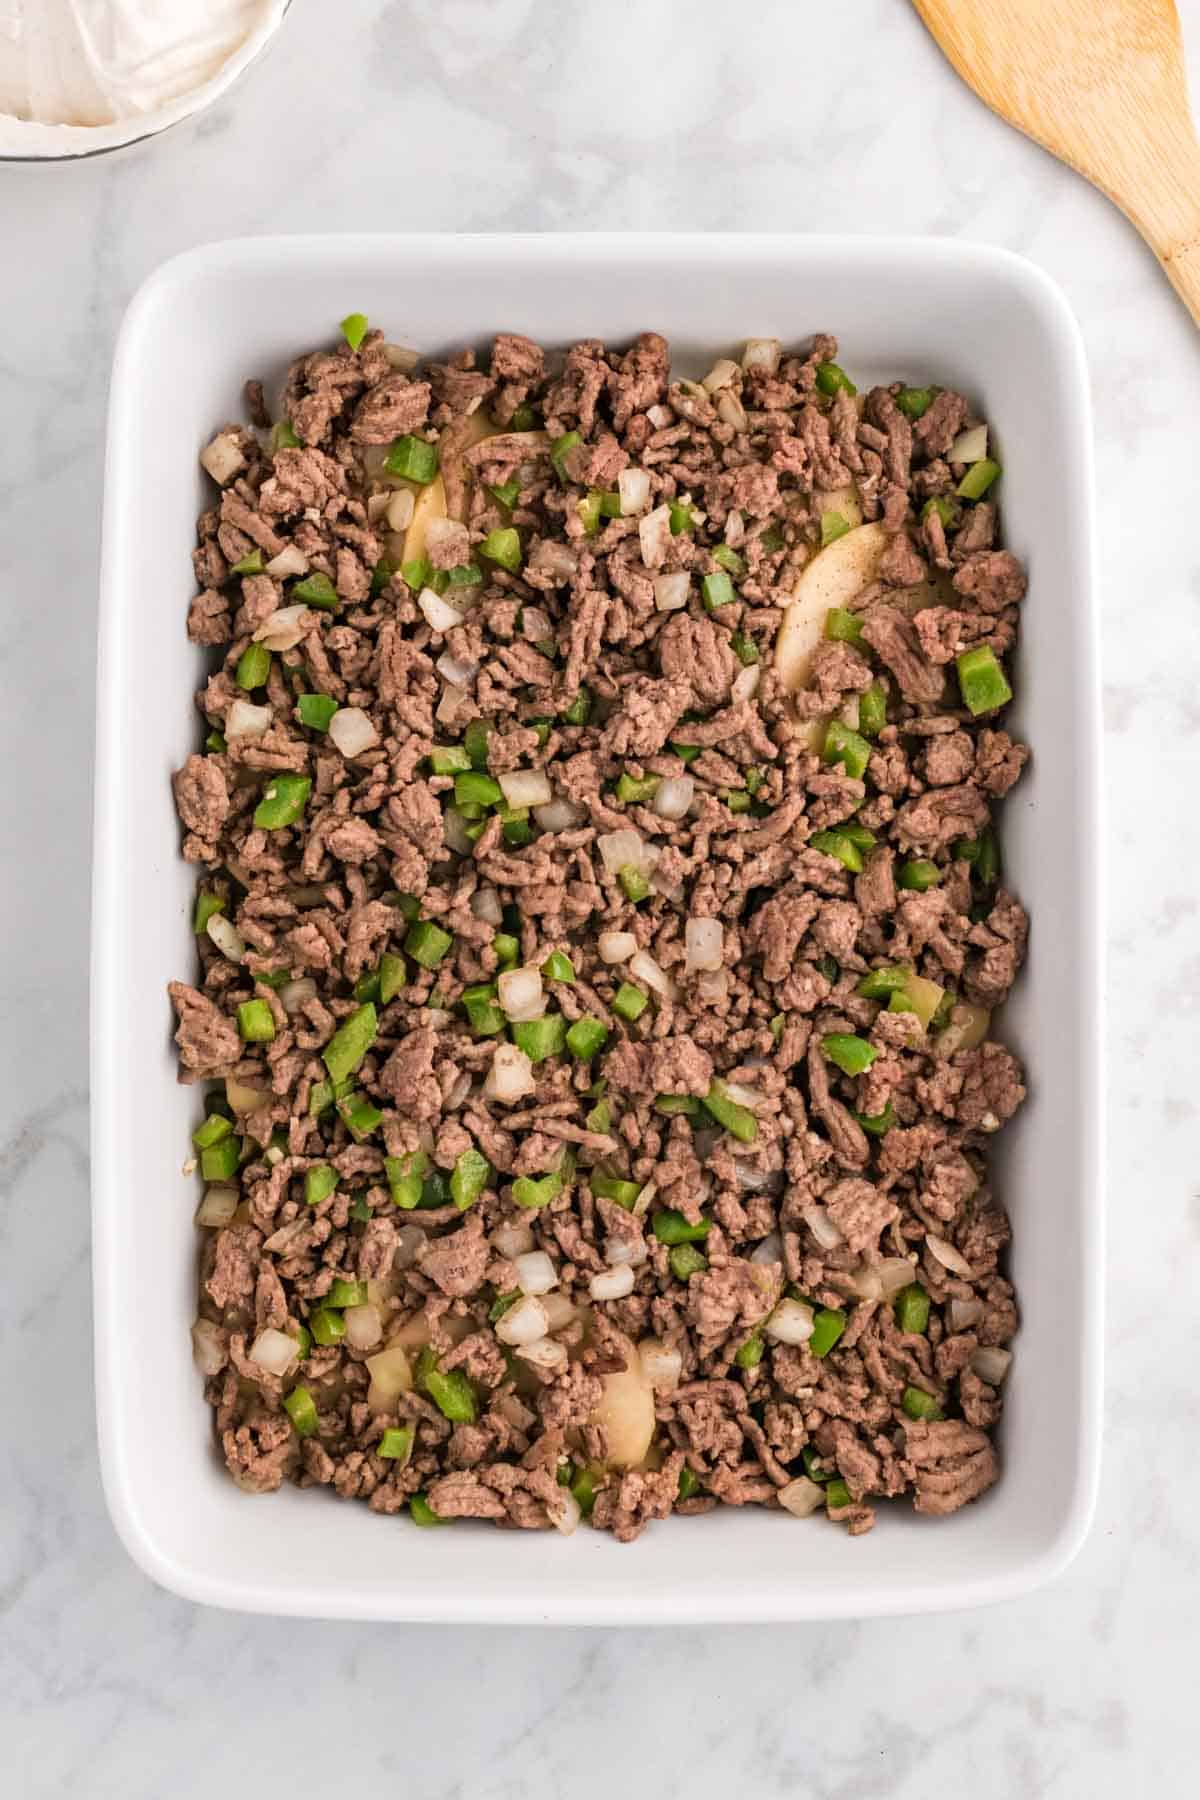 ground beef mixture on top of potatoes in a baking dish